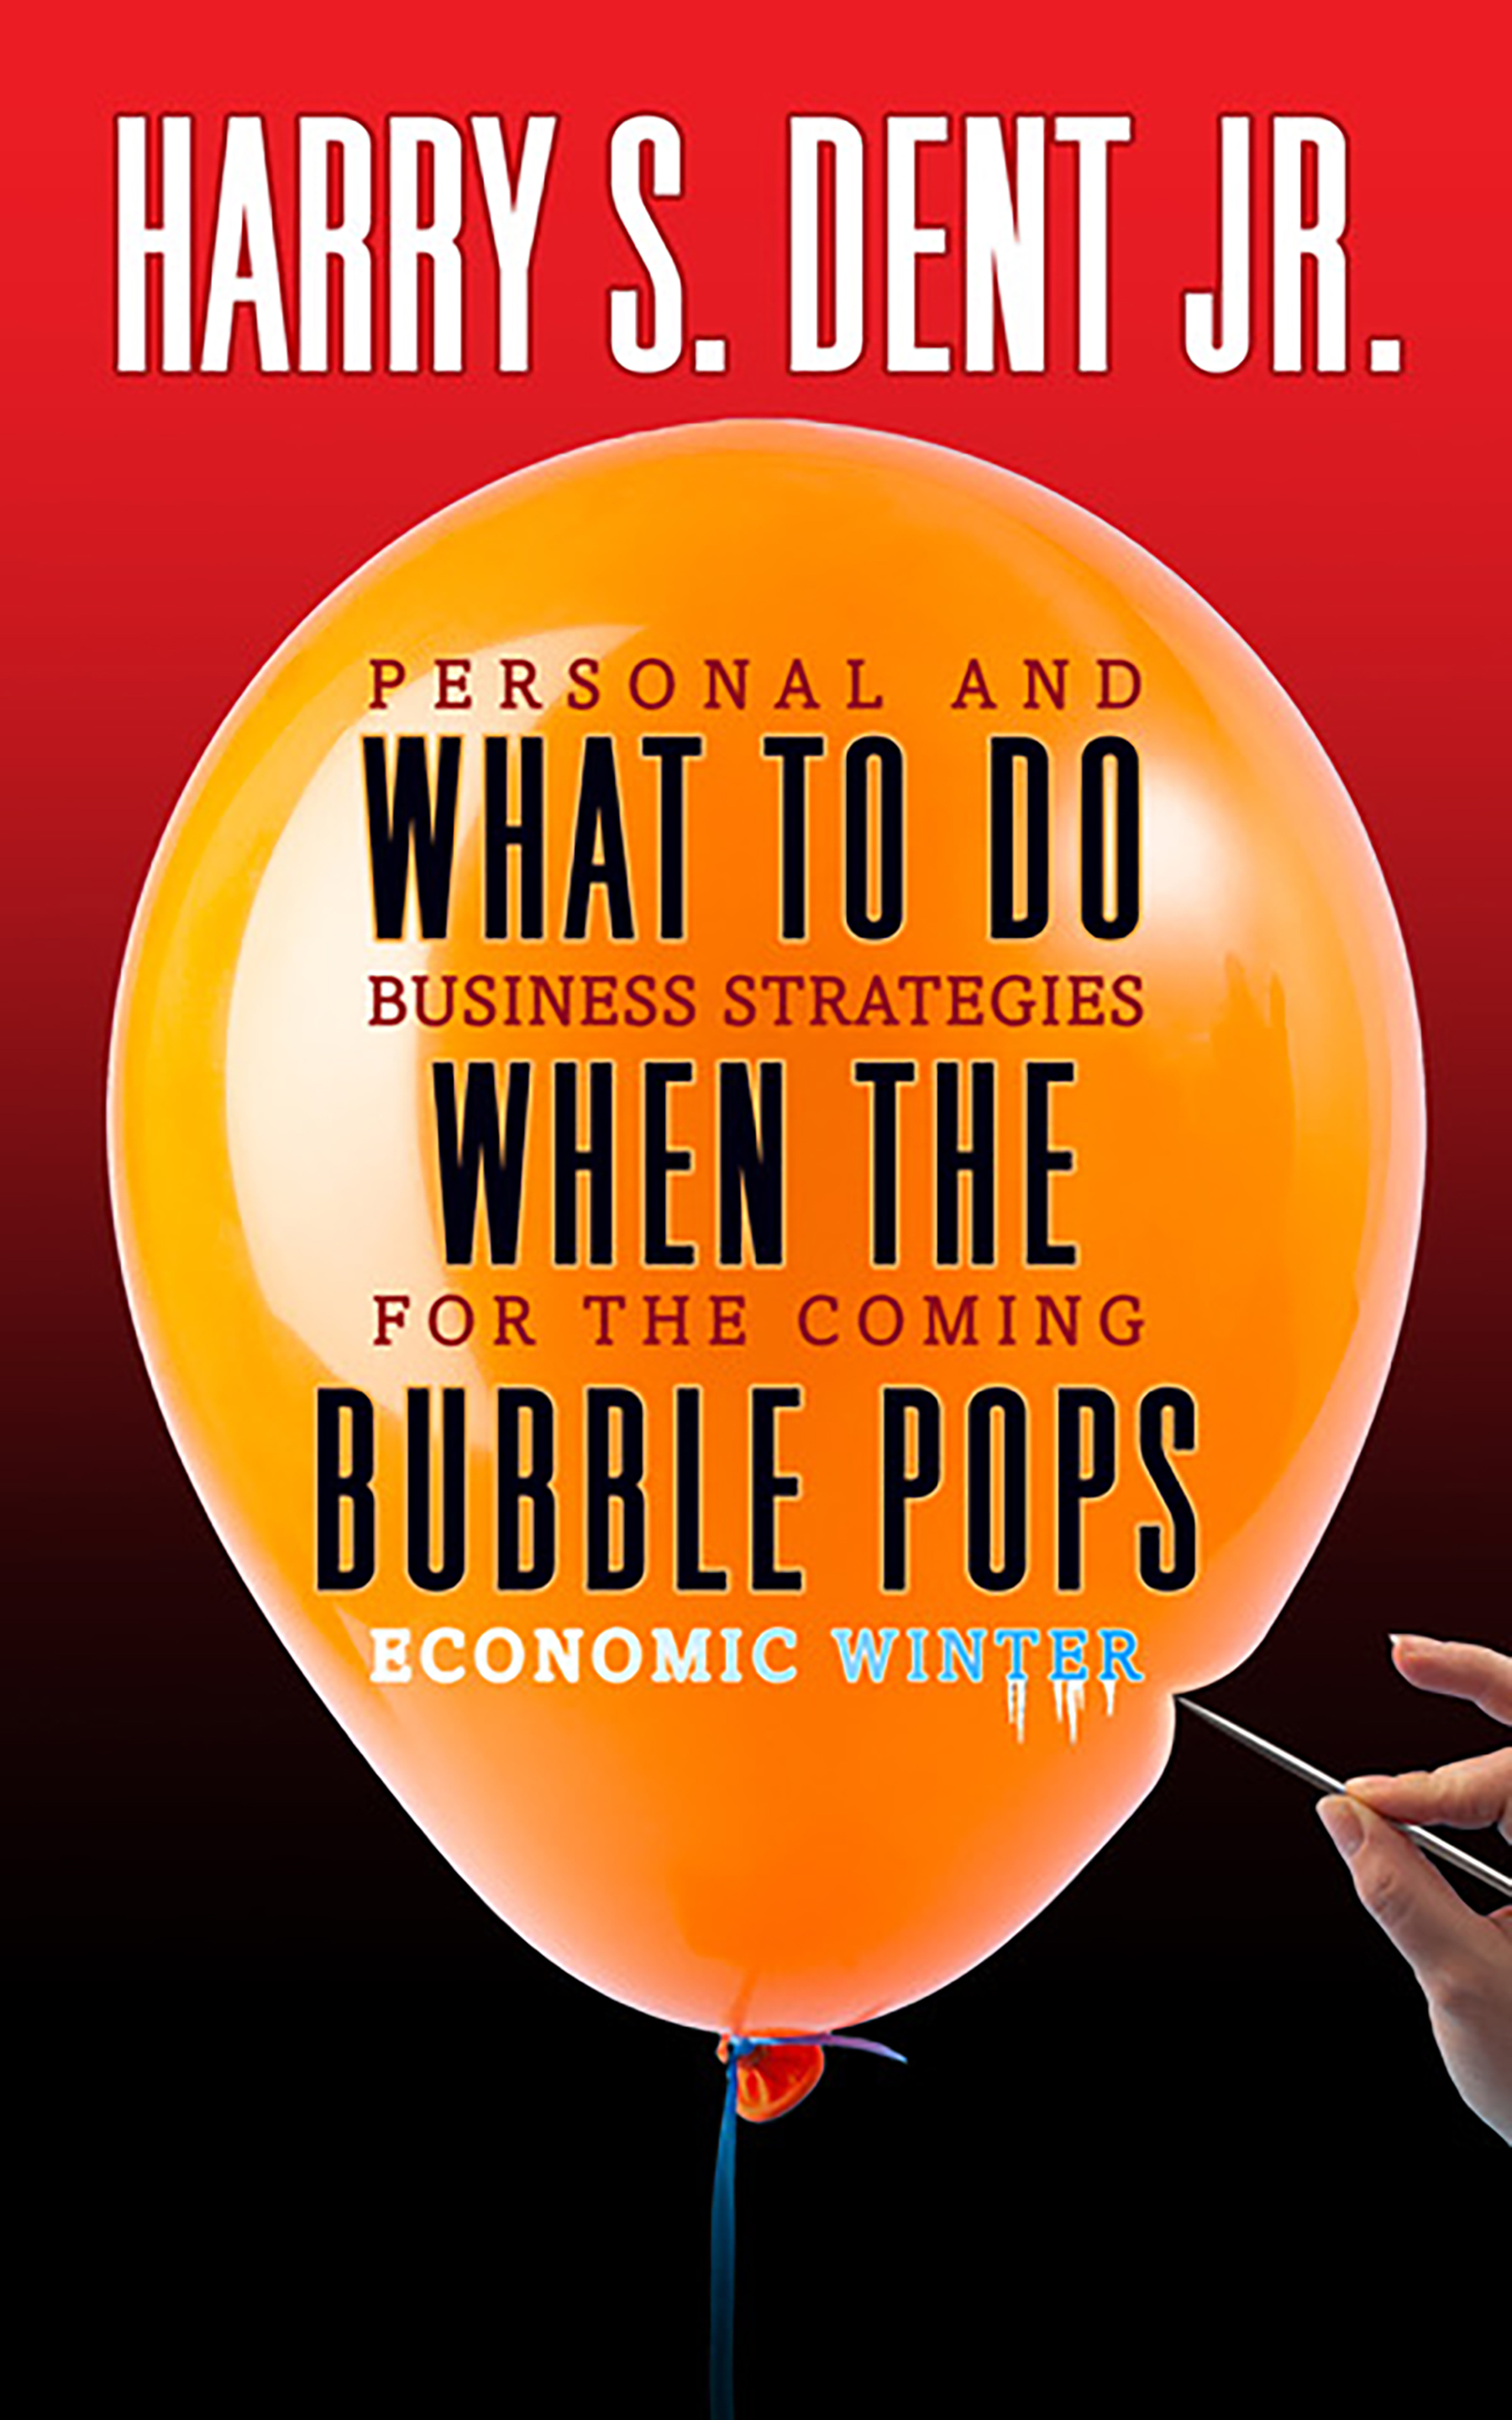 What to Do When the Bubble Pops